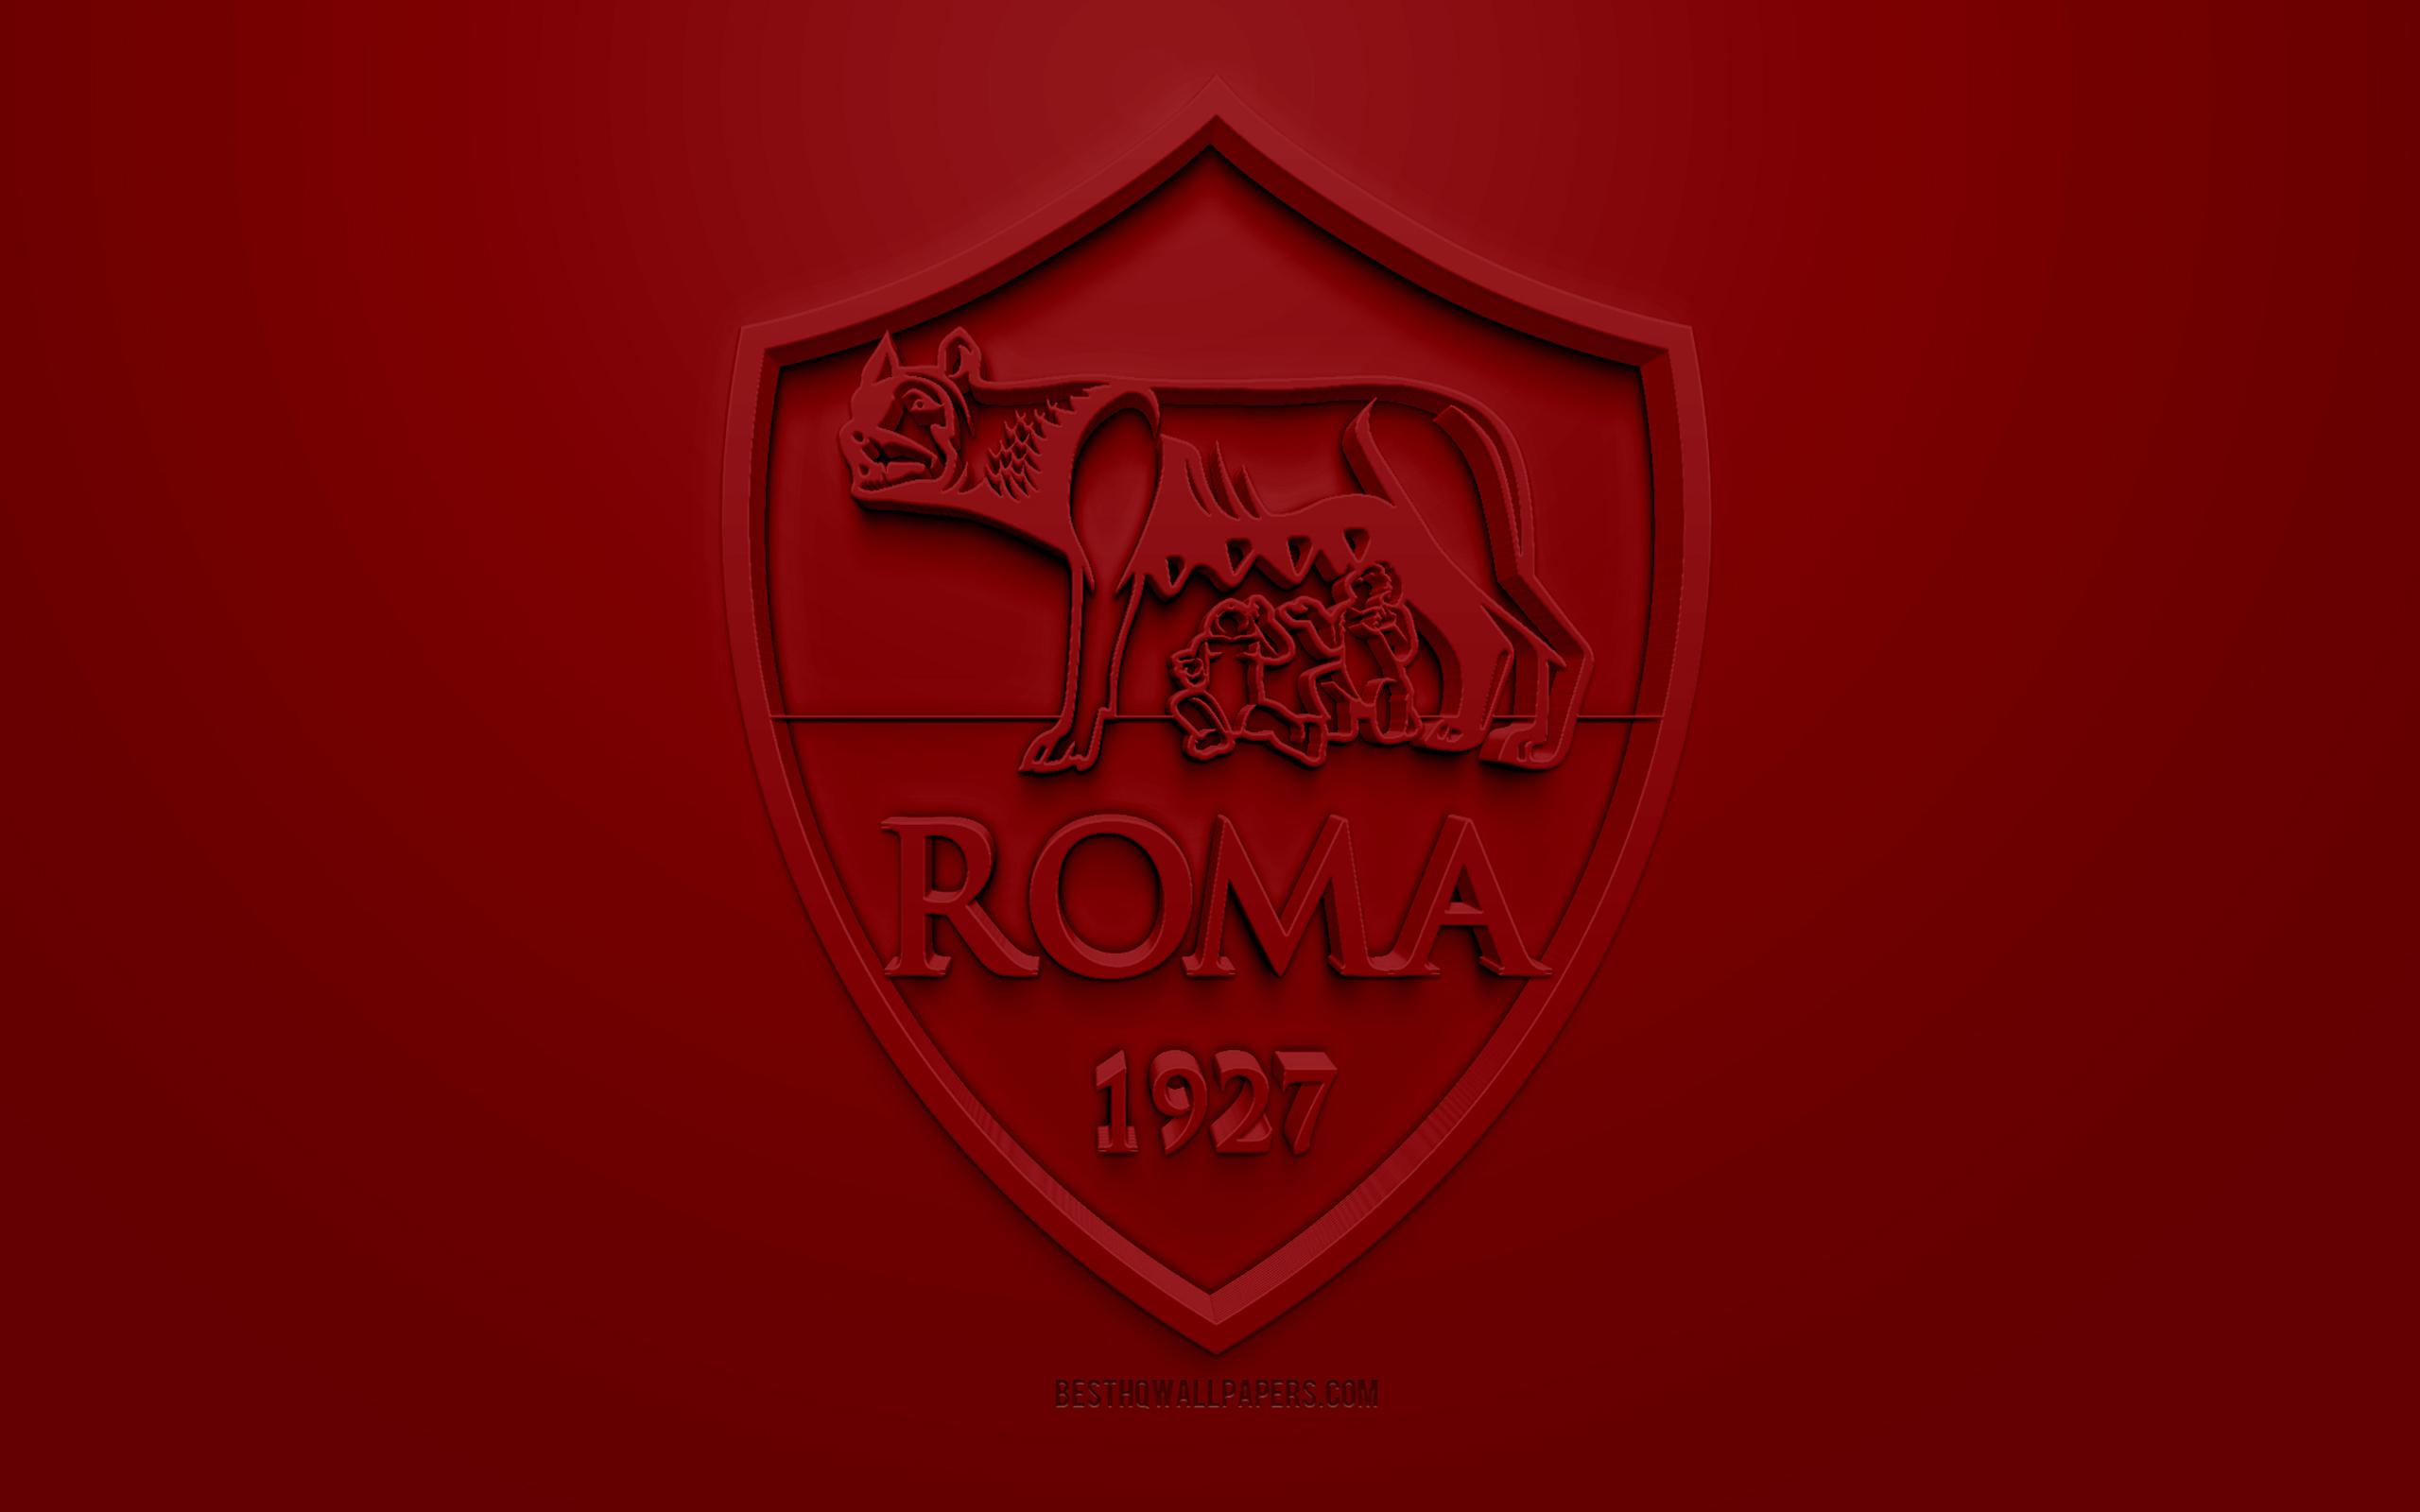 Download wallpaper AS Roma, creative 3D logo, red